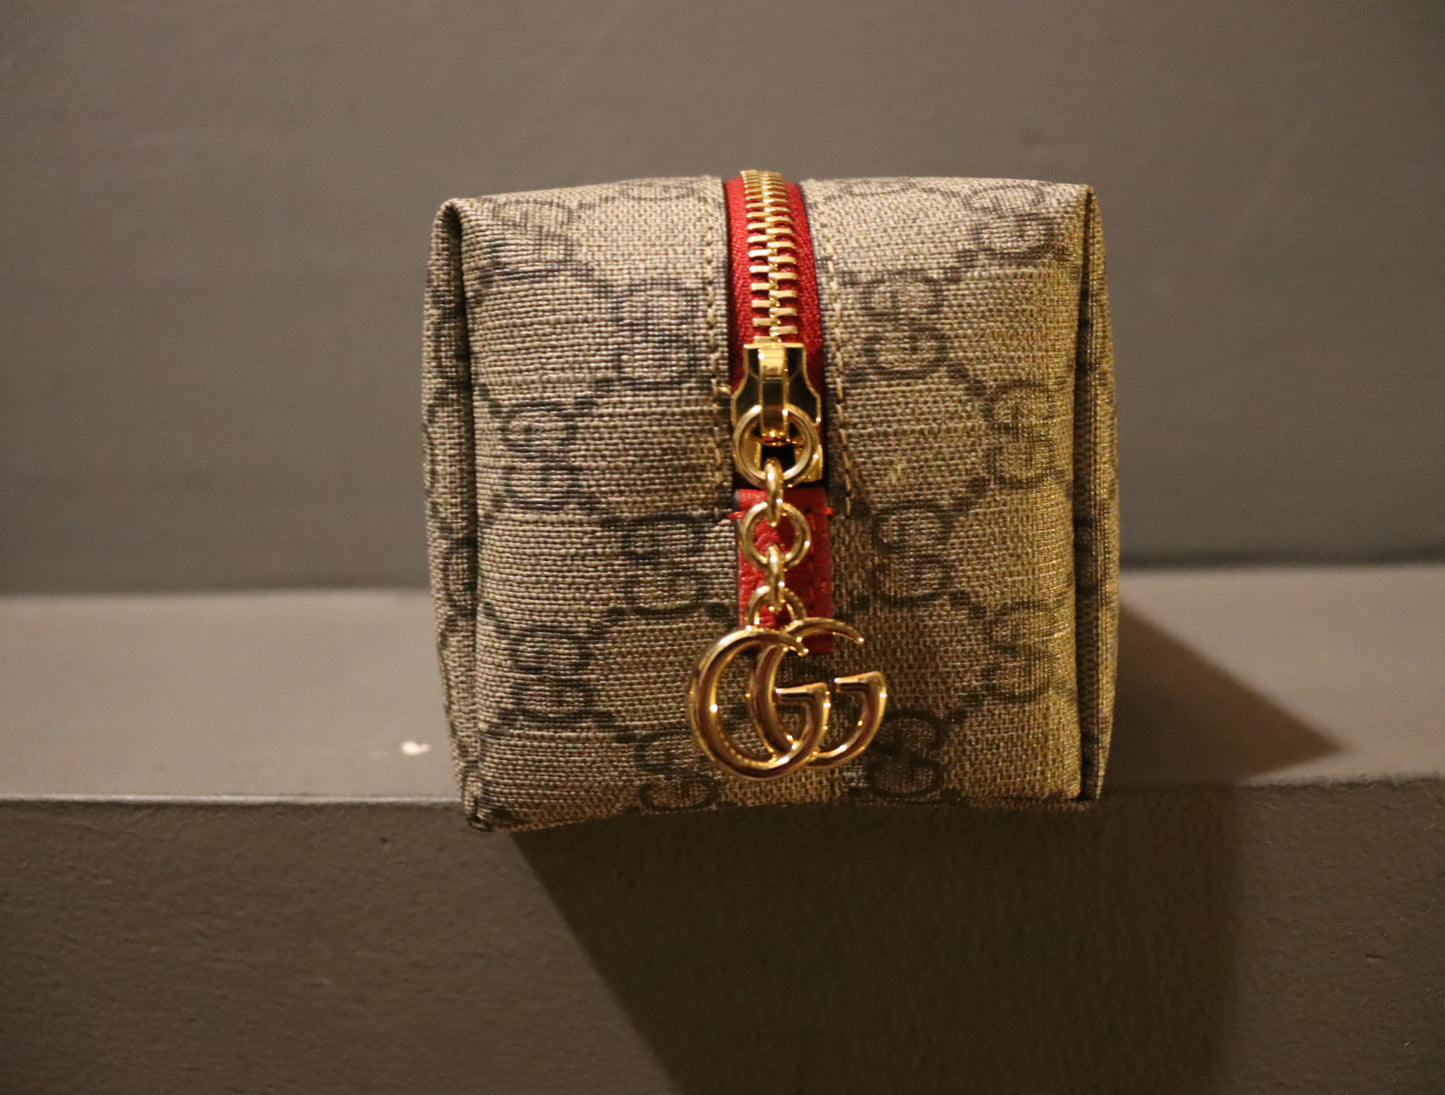 A luxurious Gucci Ophidia GG-Monogram Make-Up Bag crafted from GG-monogram canvas with leather trim and adorned with gold hardware. The bag measures approximately 3.3 inches in length, 7 inches in width, and 3.4 inches in depth. It boasts a striking red exterior and a green interior.